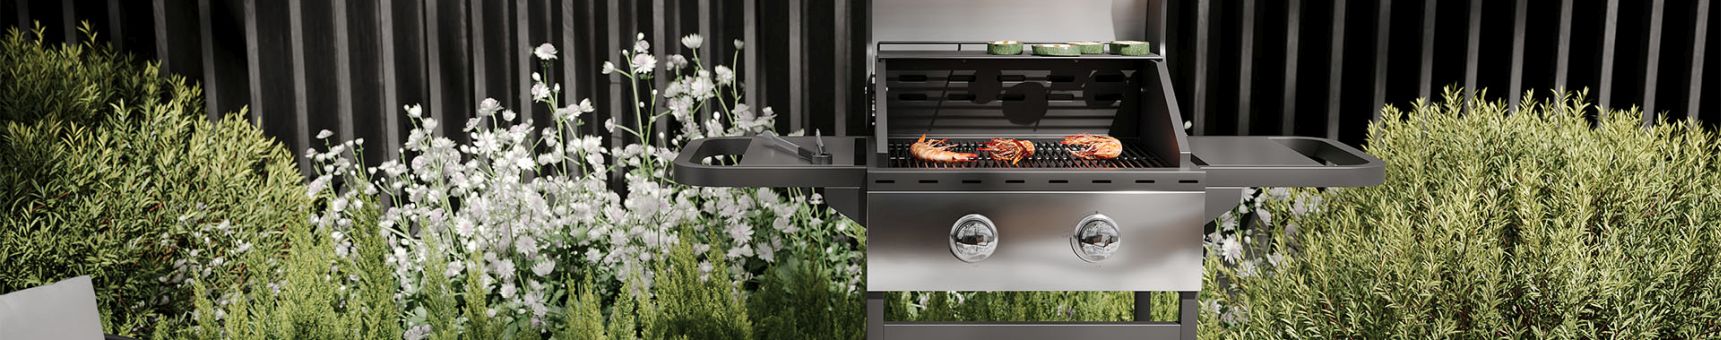 Gasgrills - stainless steel